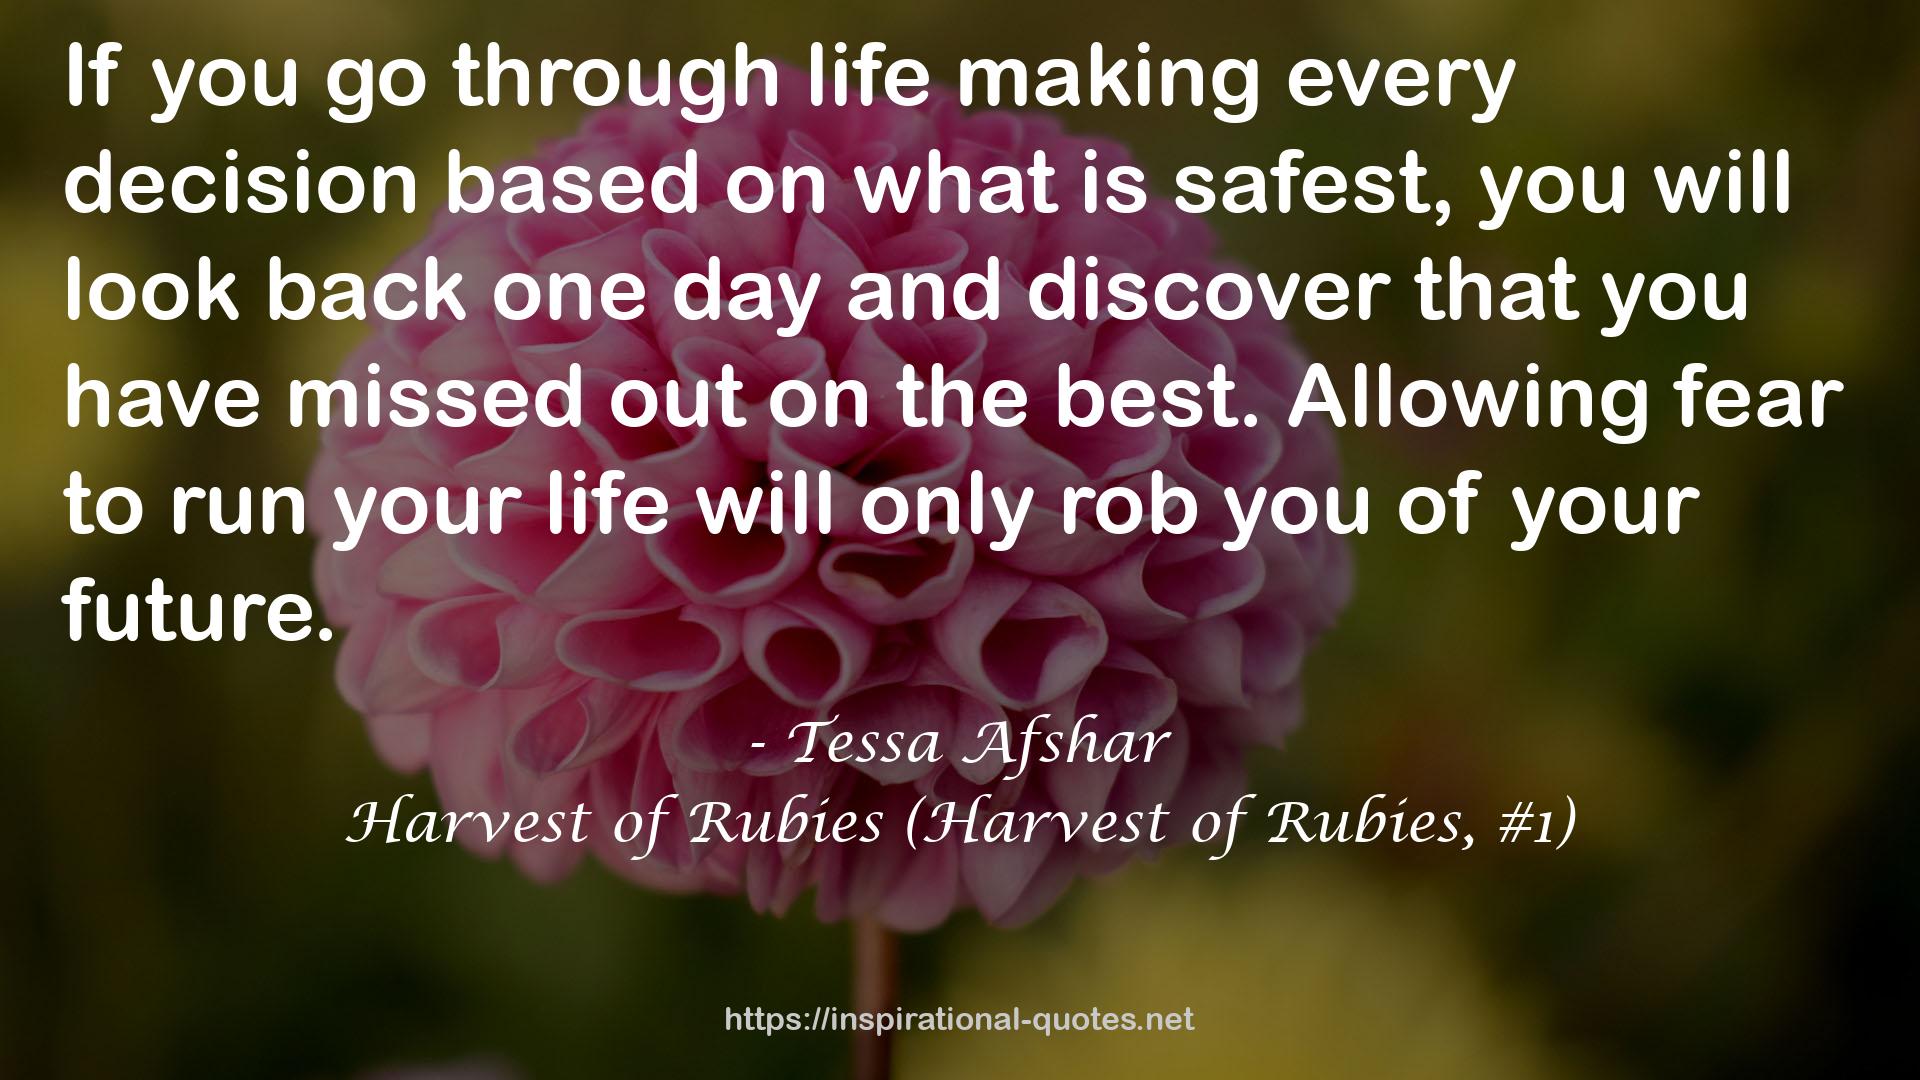 Harvest of Rubies (Harvest of Rubies, #1) QUOTES